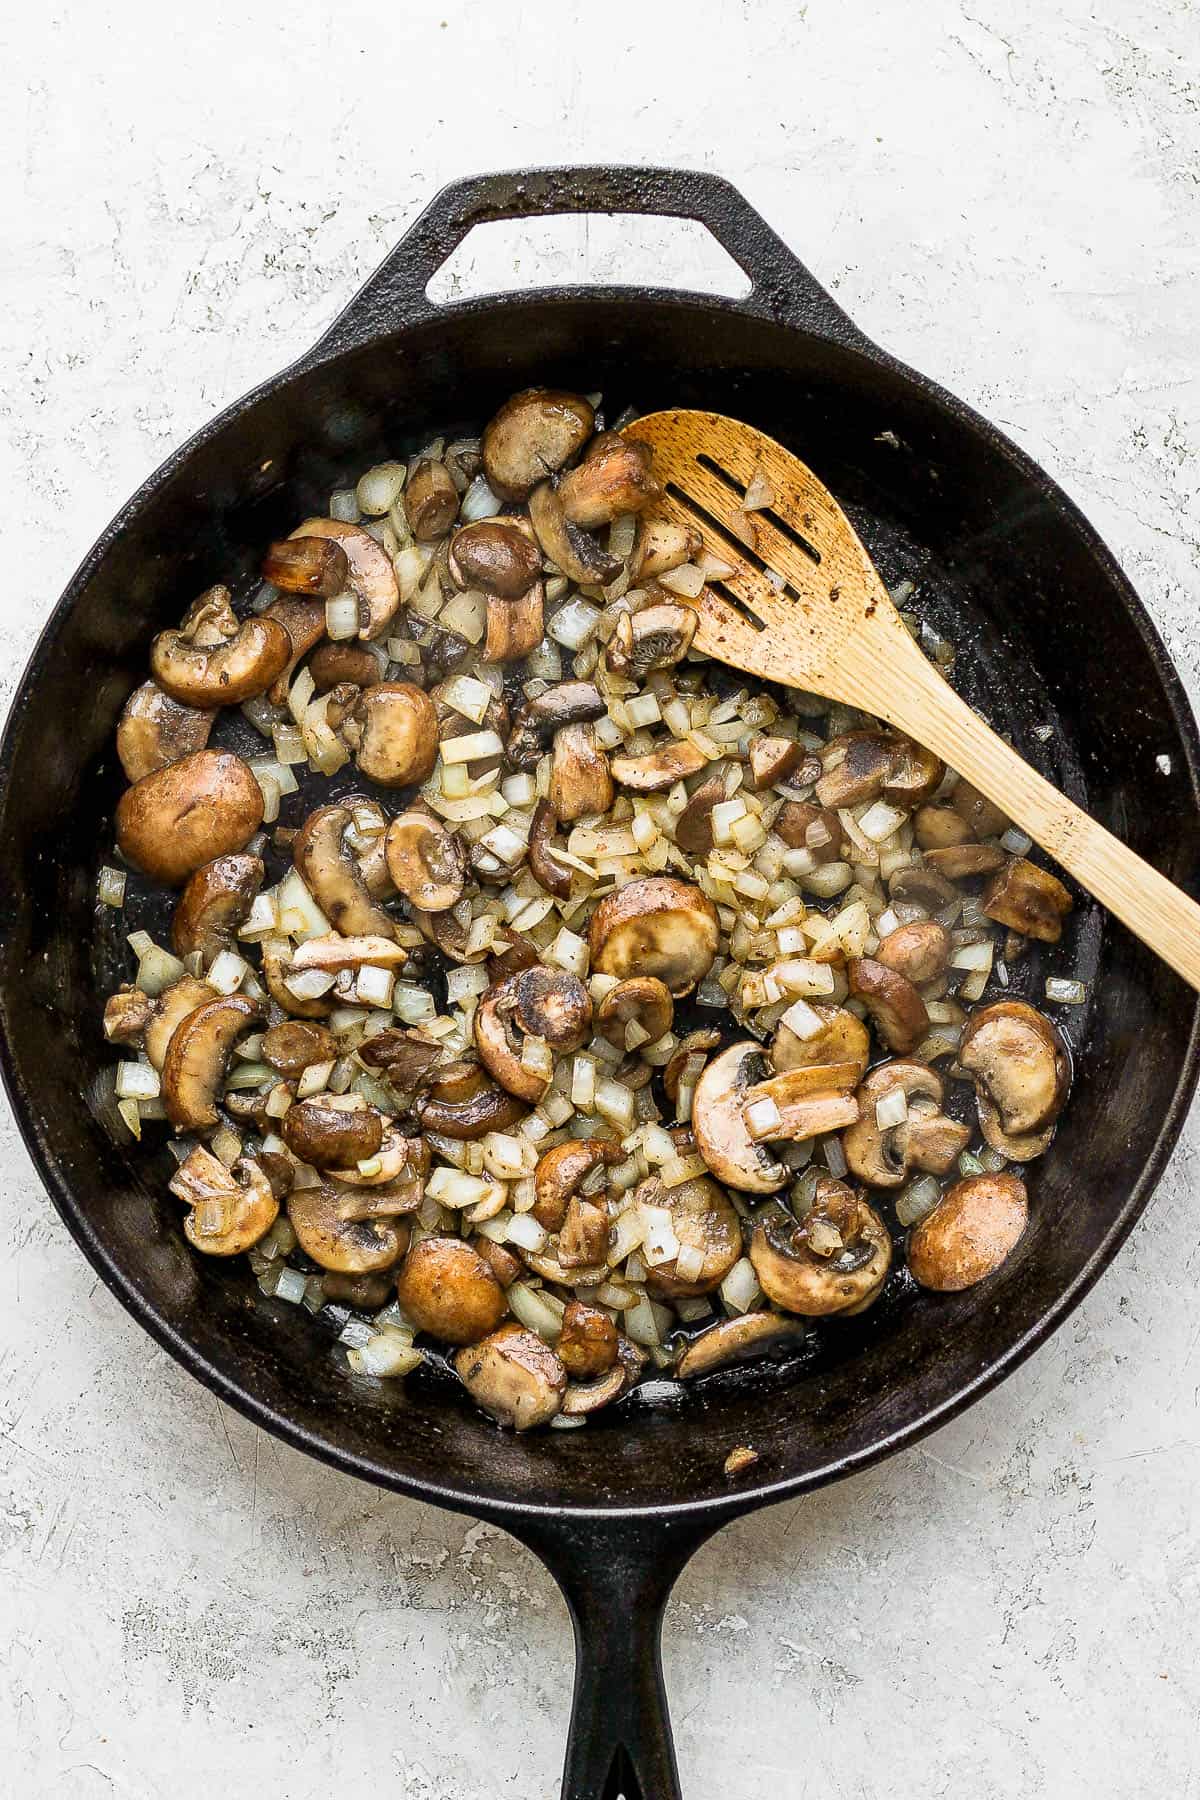 Diced onion, sliced mushrooms, and garlic being cooked in the same cast-iron skillet as the bacon was earlier.